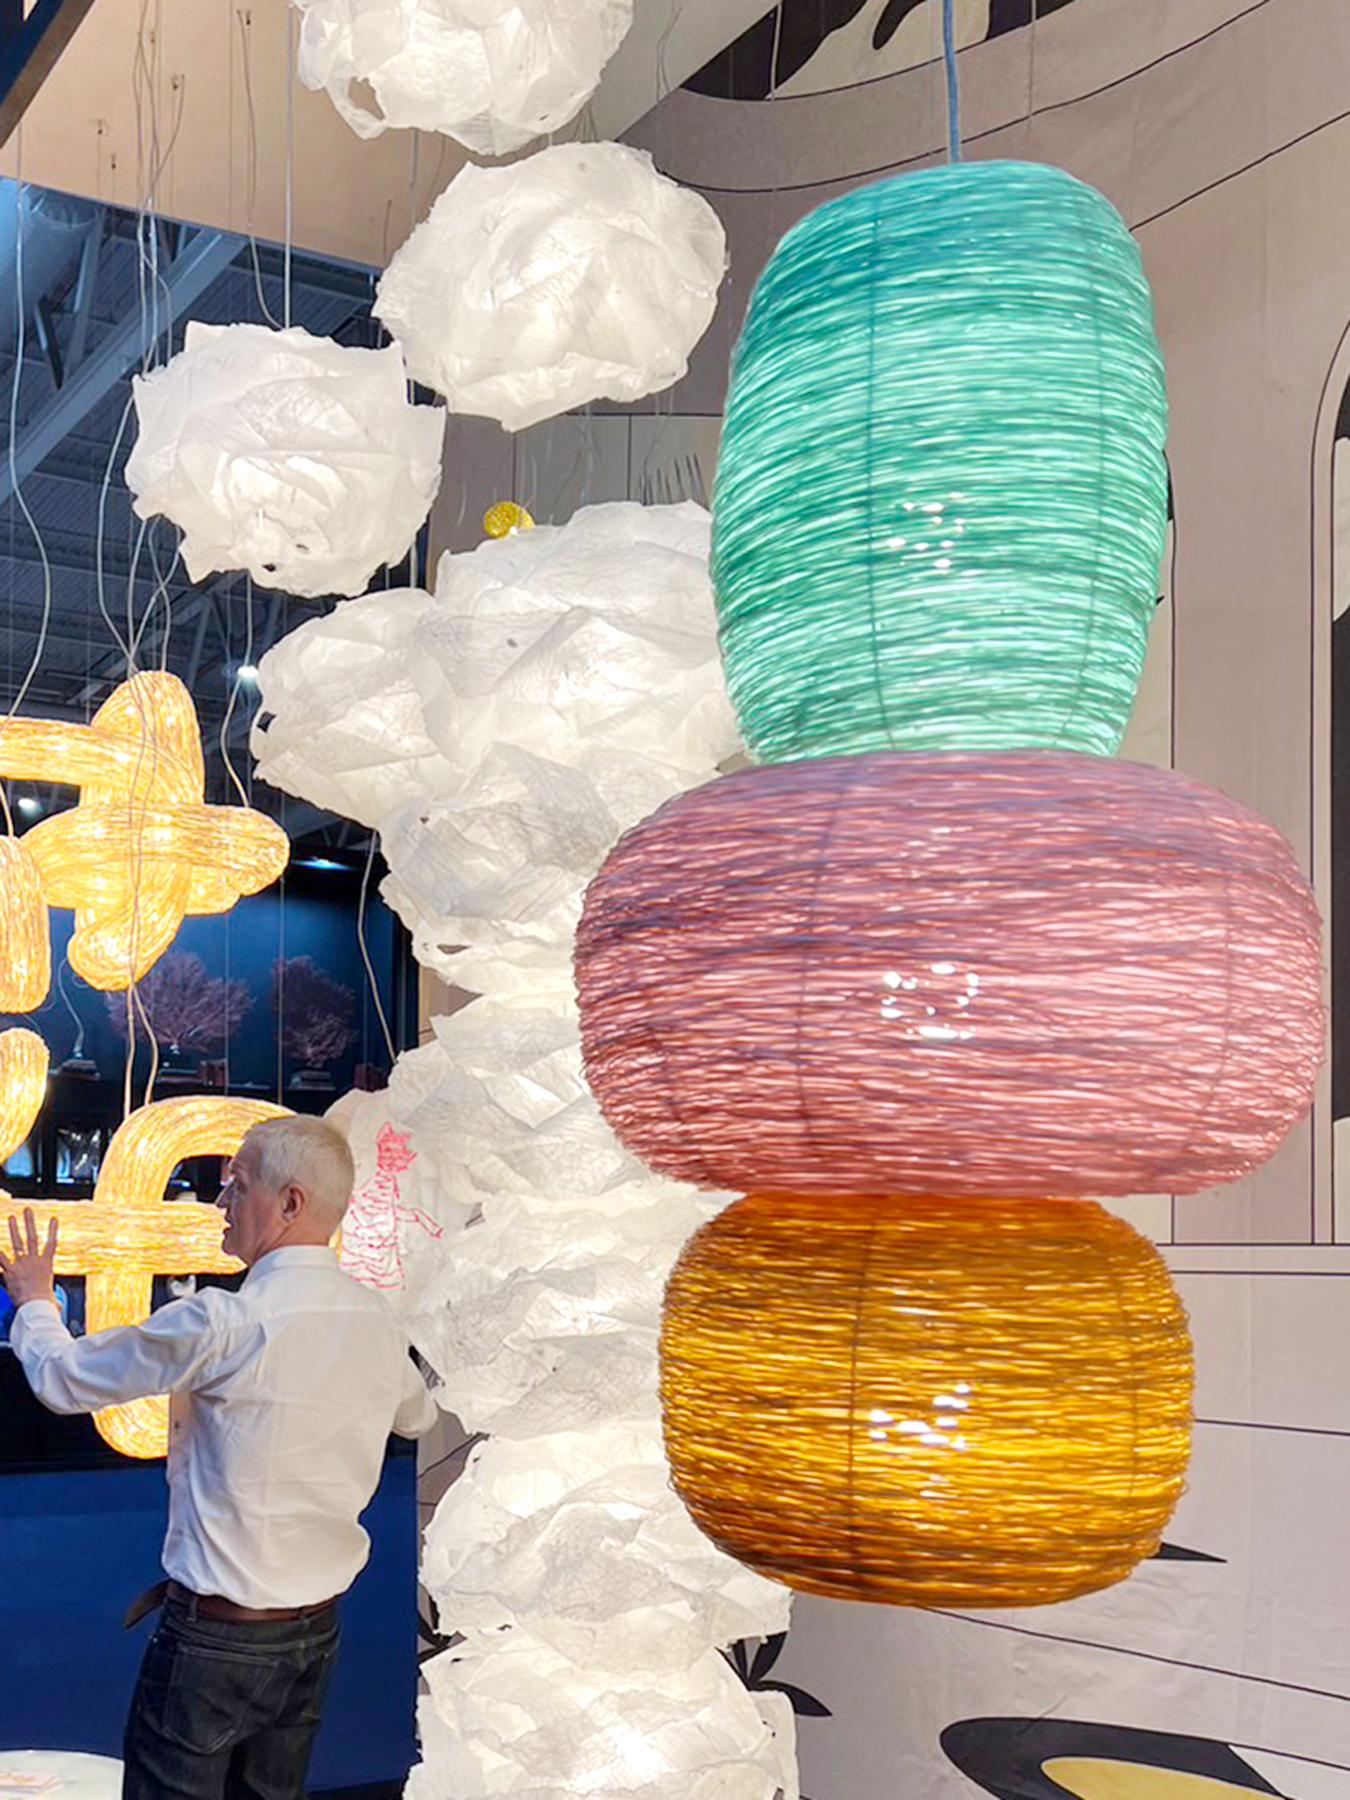 Each Shelter pendant is created with the elemental and universal form of a loosely woven nest like home, that is then incarnated by light inside, diffused through many metres of lateral recycled plastic waste material . 

The Shelter pendant